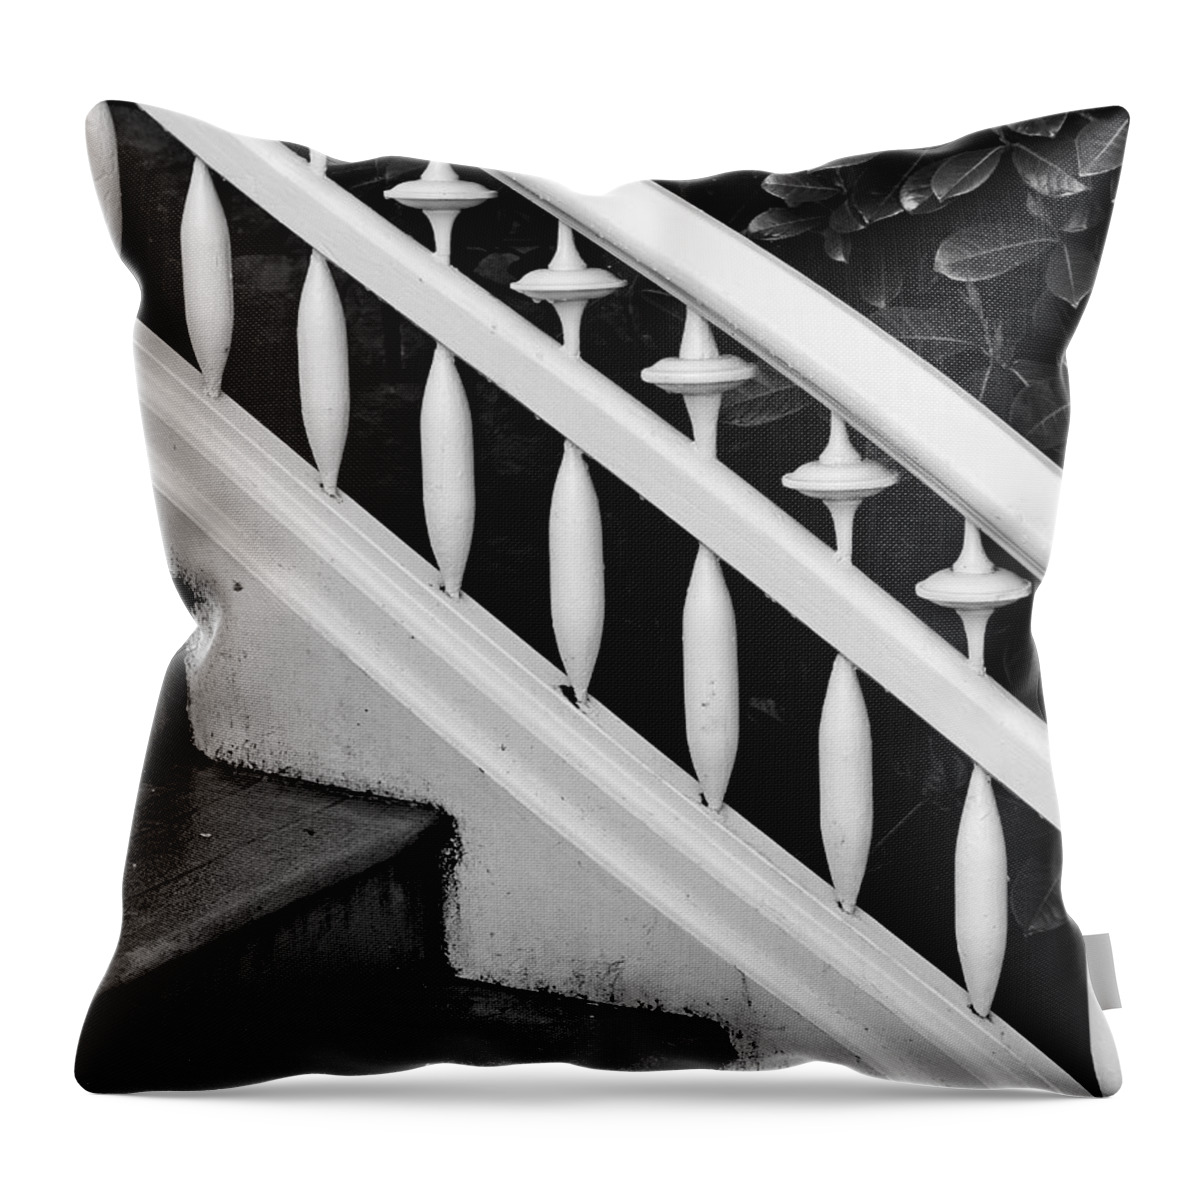 Victorian Banister In Black And White Throw Pillow featuring the photograph Banister In Black And White by Michael Ramsey